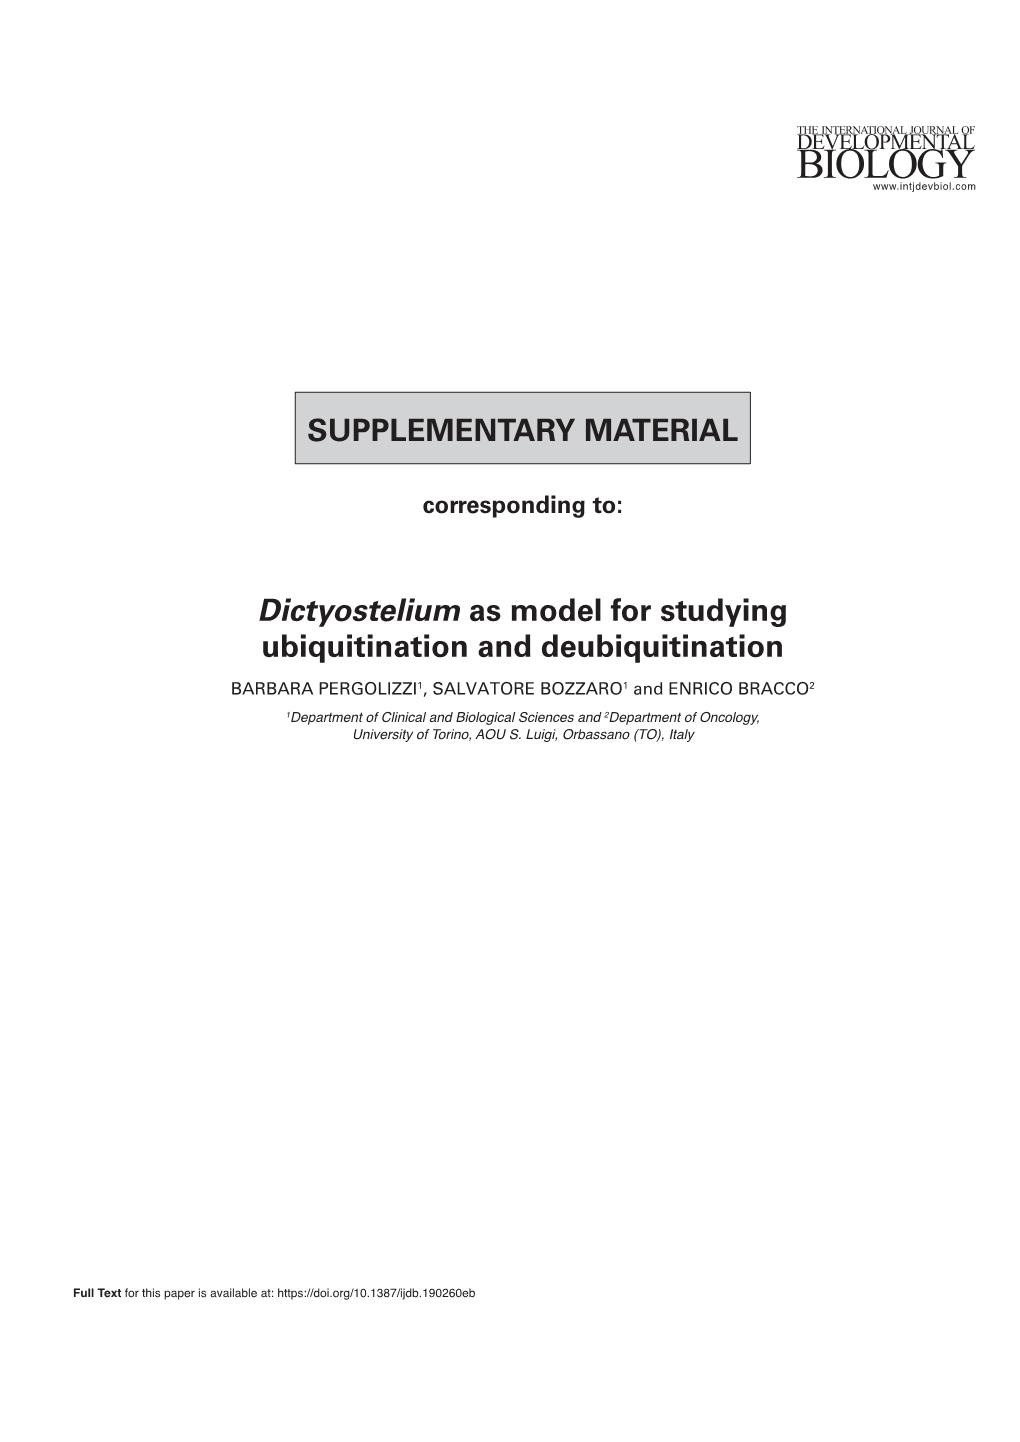 SUPPLEMENTARY MATERIAL Dictyostelium As Model for Studying